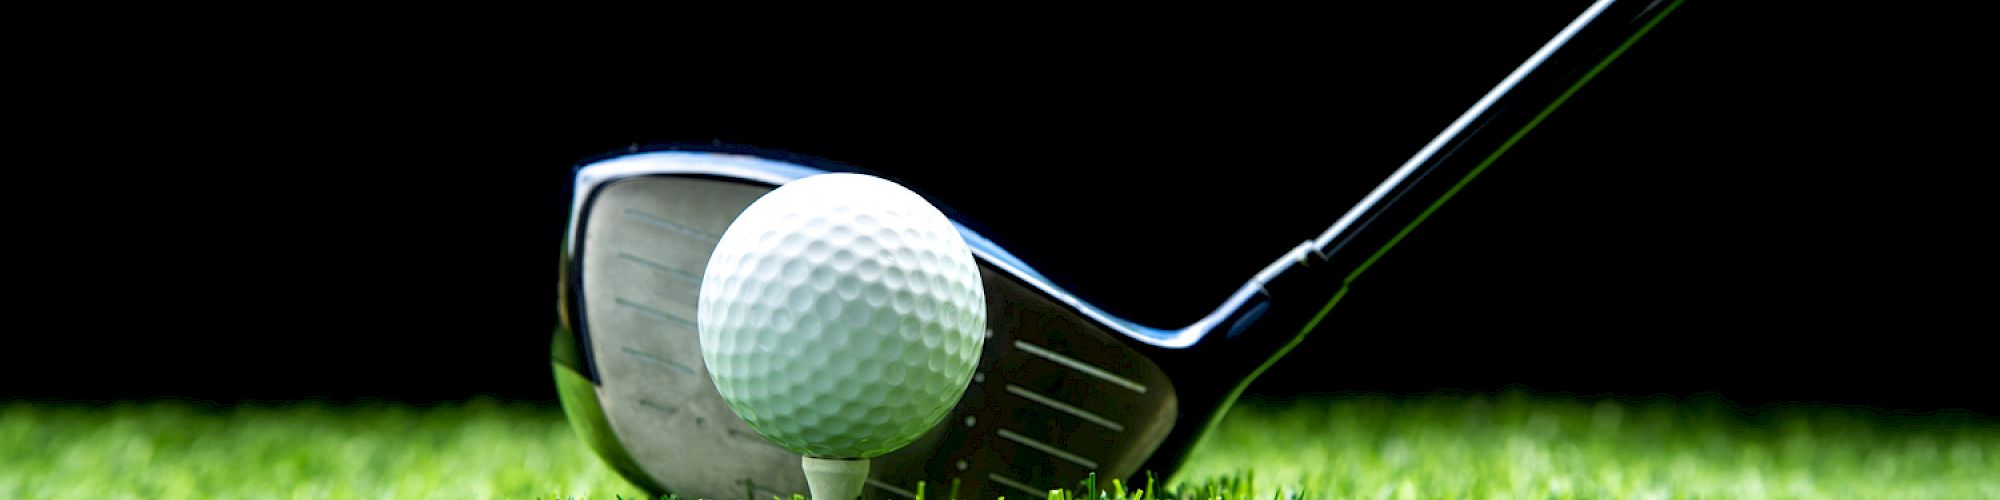 The image shows a golf club positioned next to a golf ball on a tee, set on green grass with a dark background.